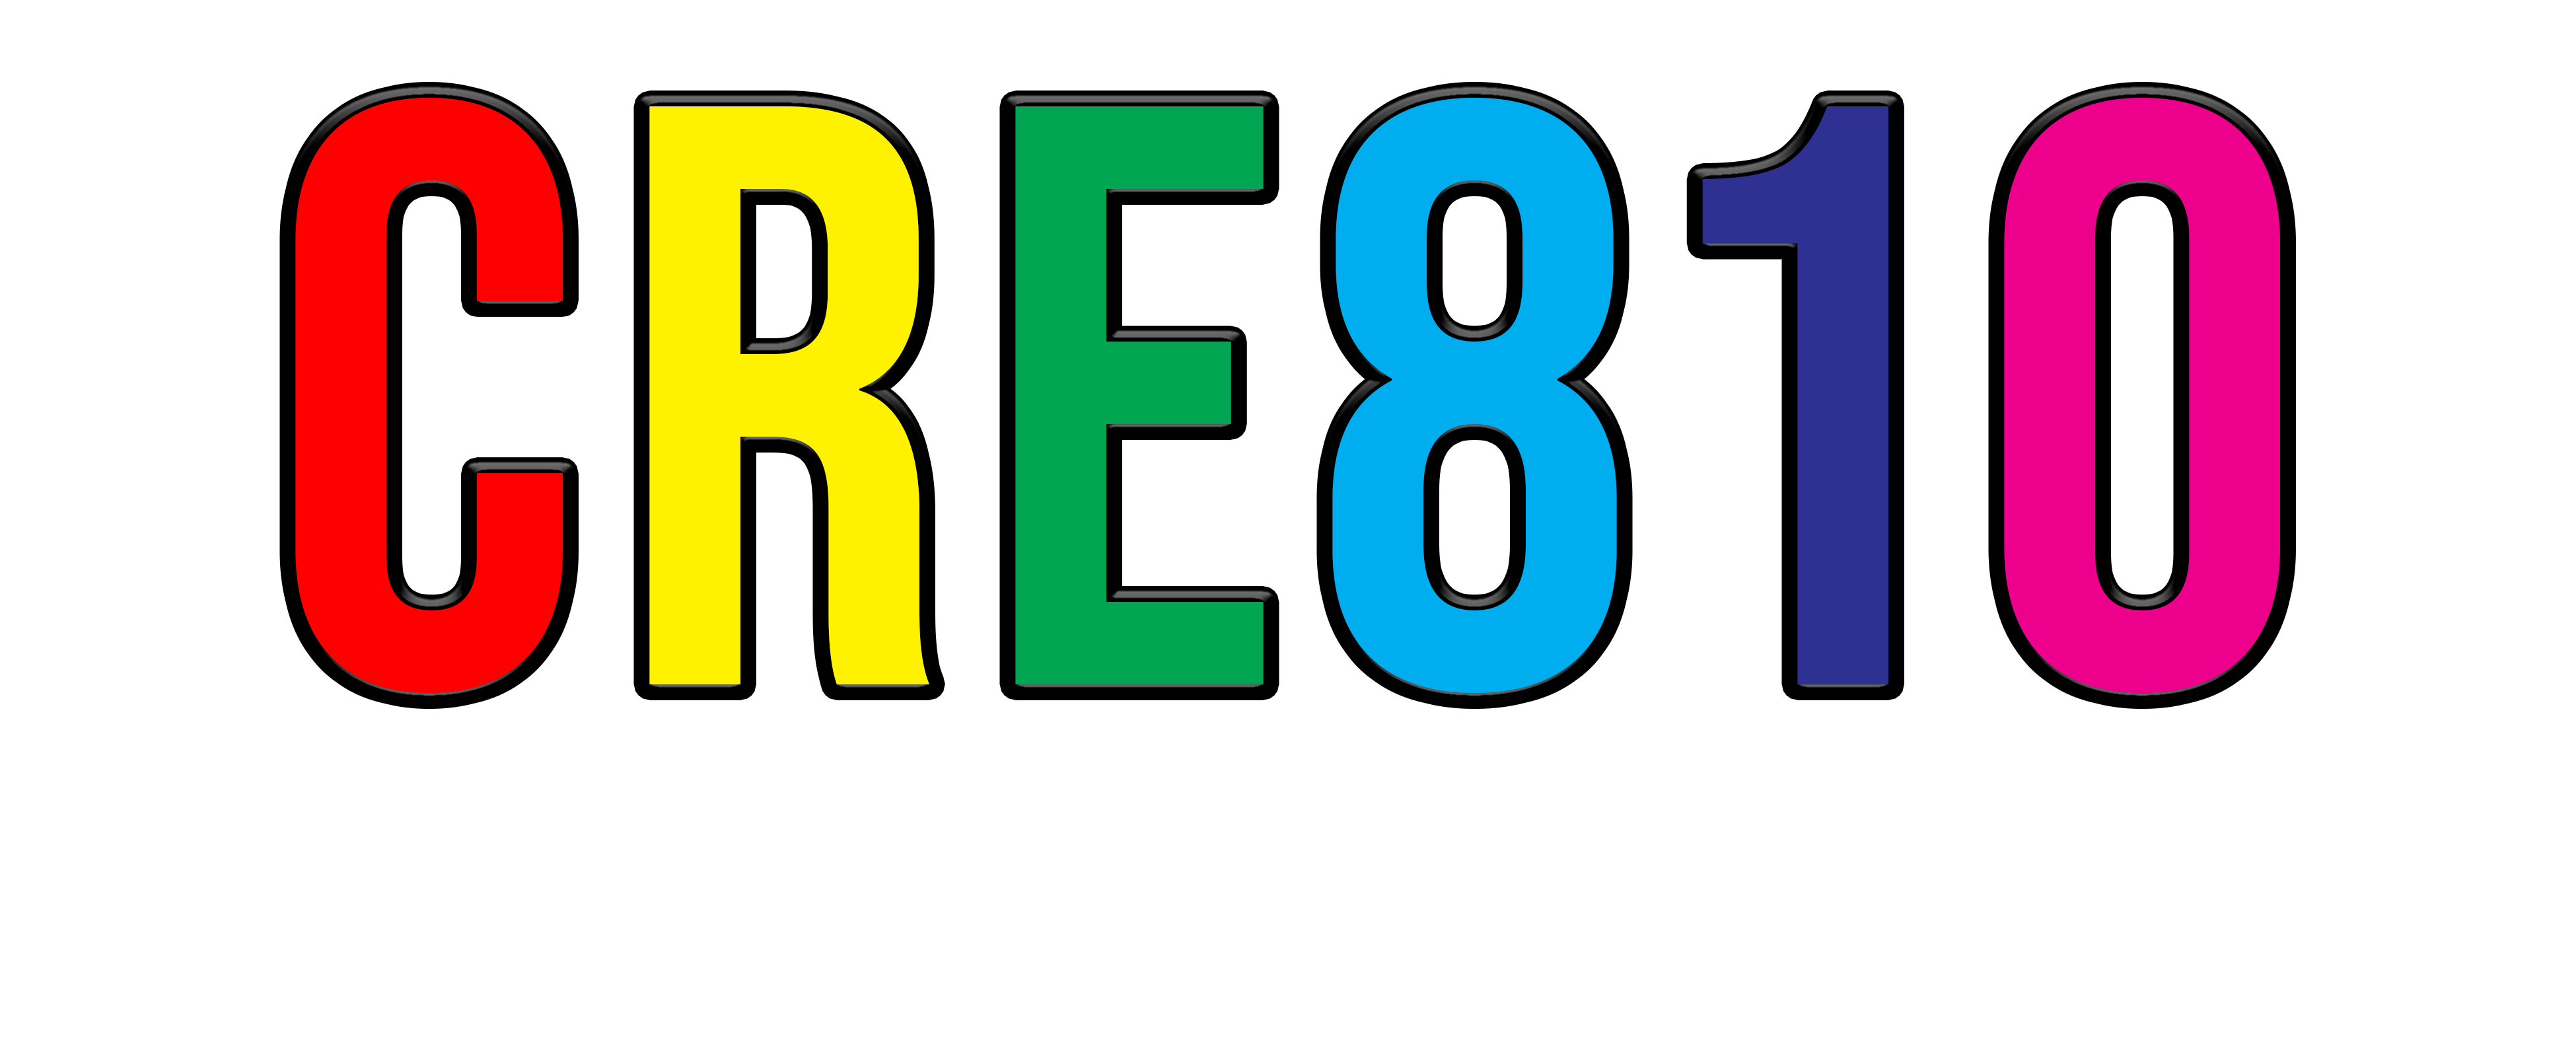 CRE810 Studios and Consulting